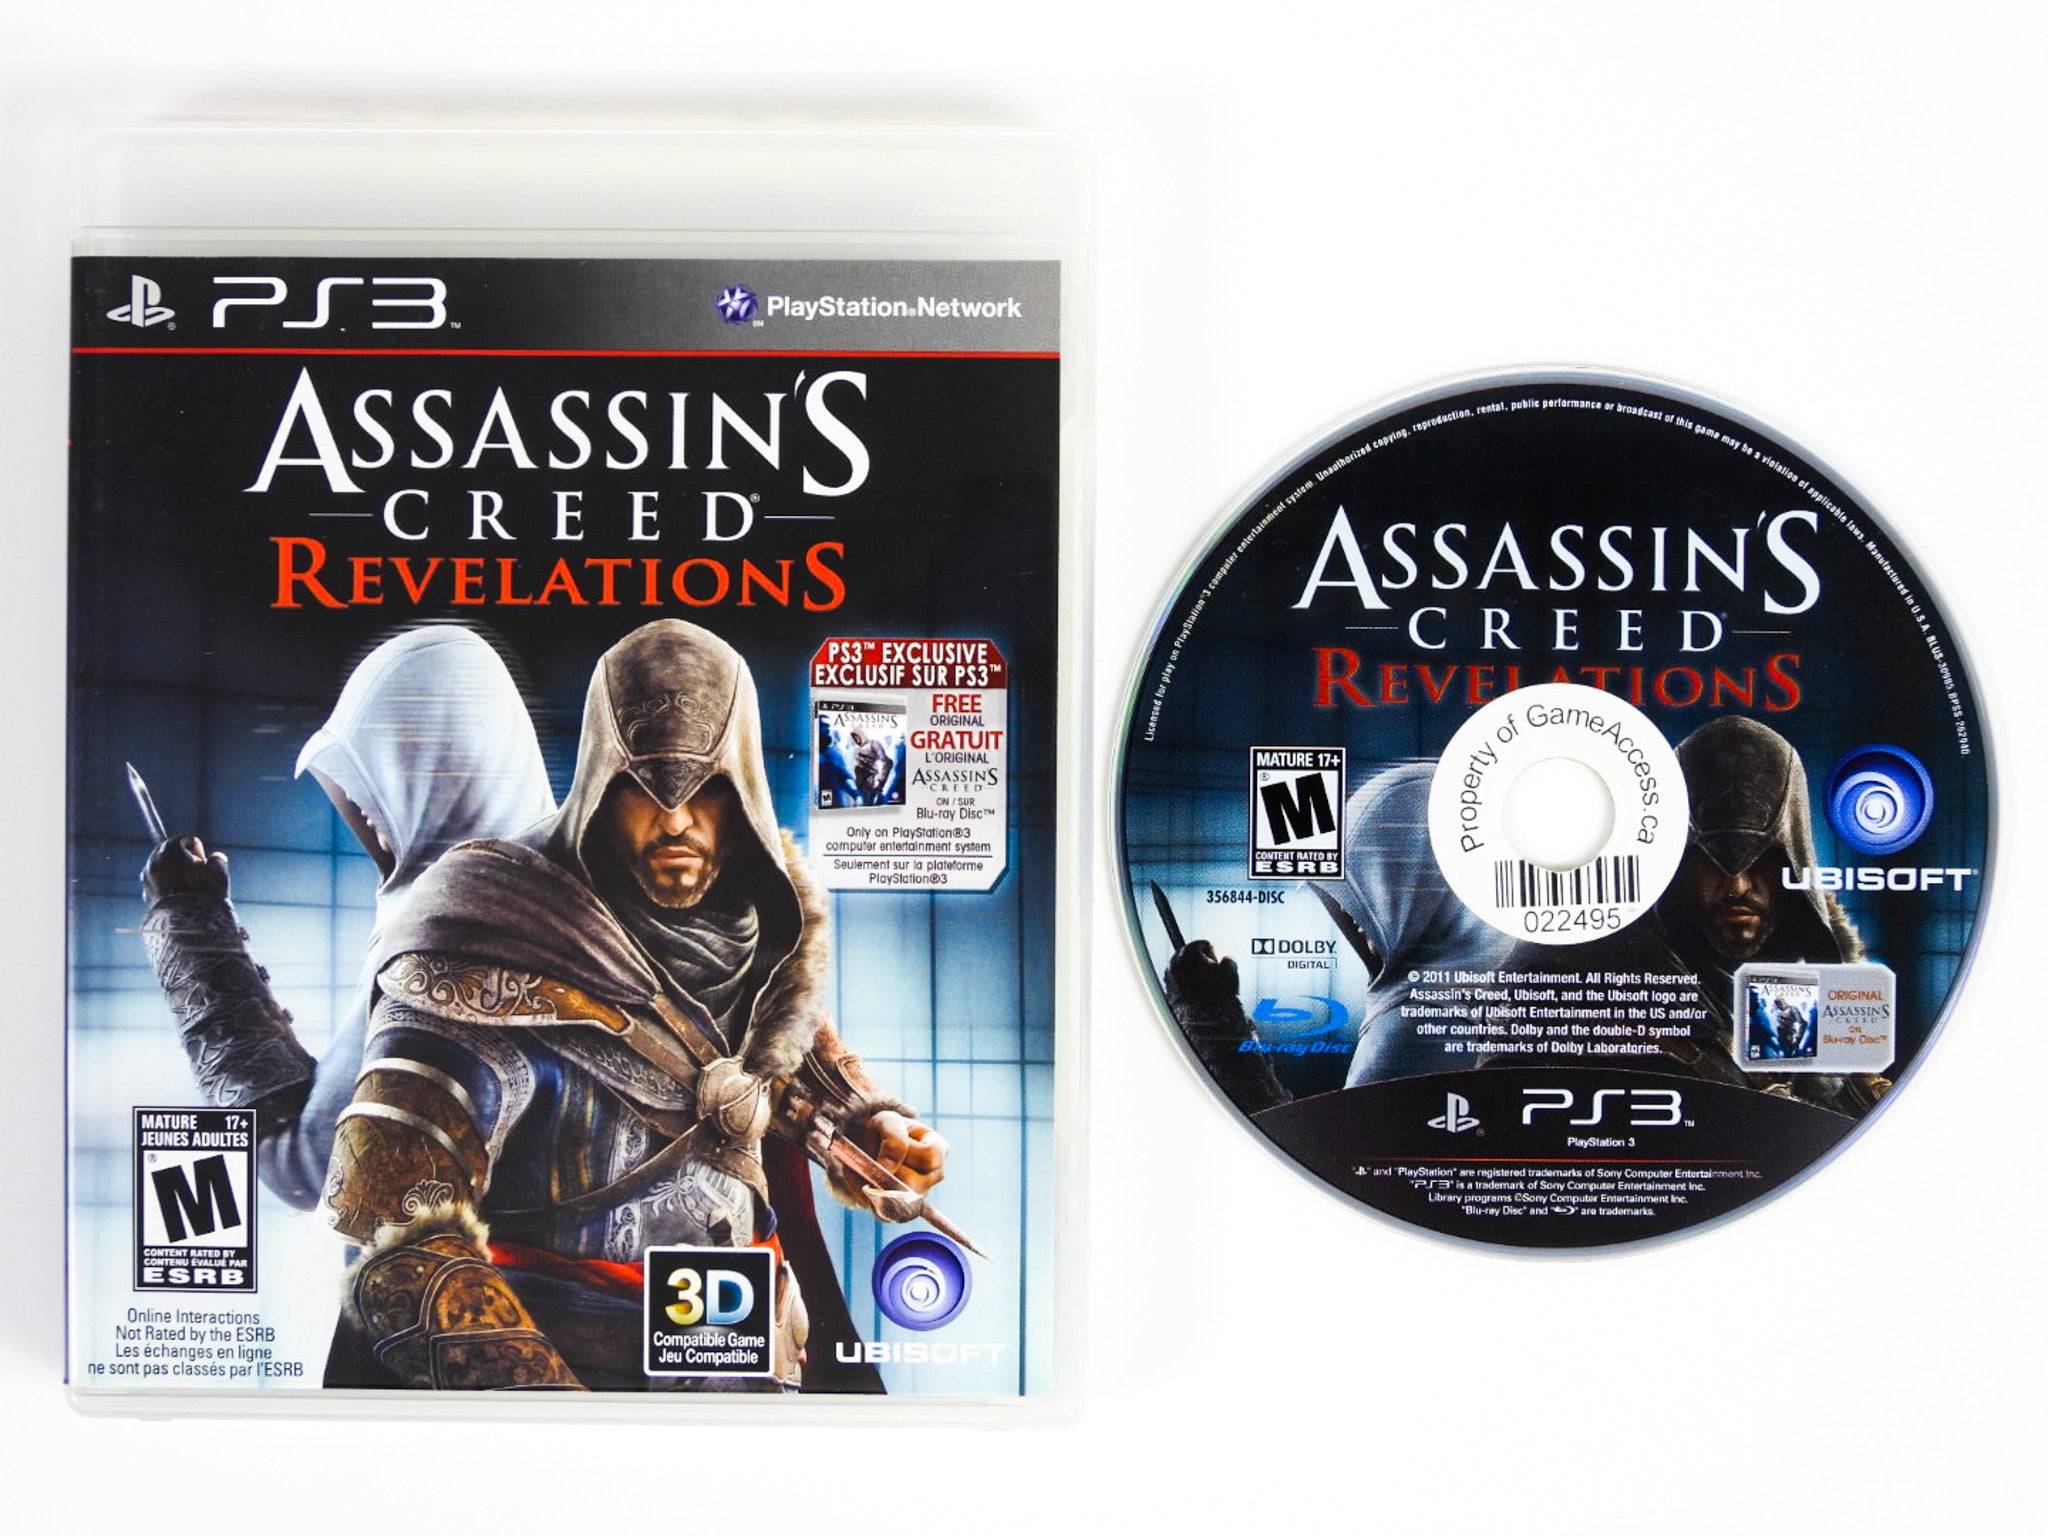 Assassin's Creed: Revelations (Sony PlayStation 3, 2011) for sale